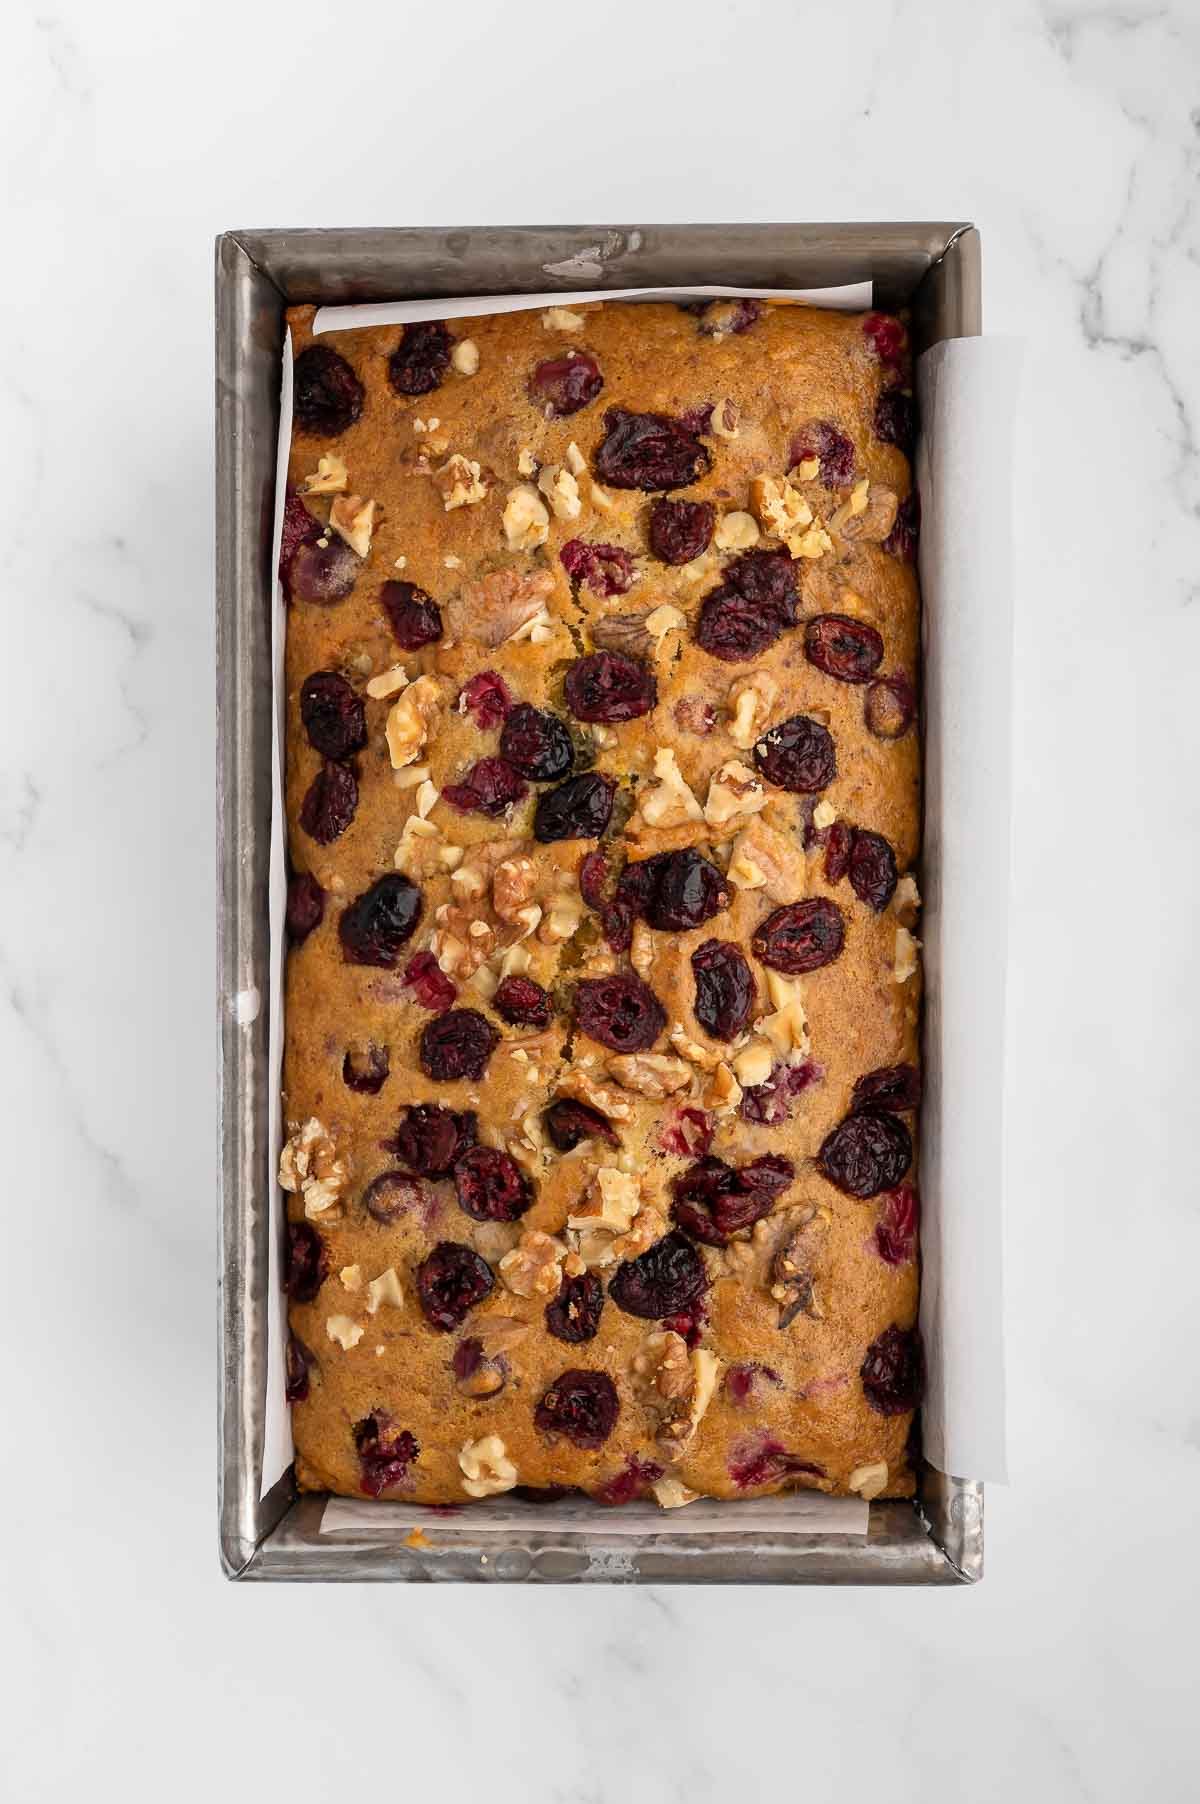 A baked loaf of walnut cranberry bread.